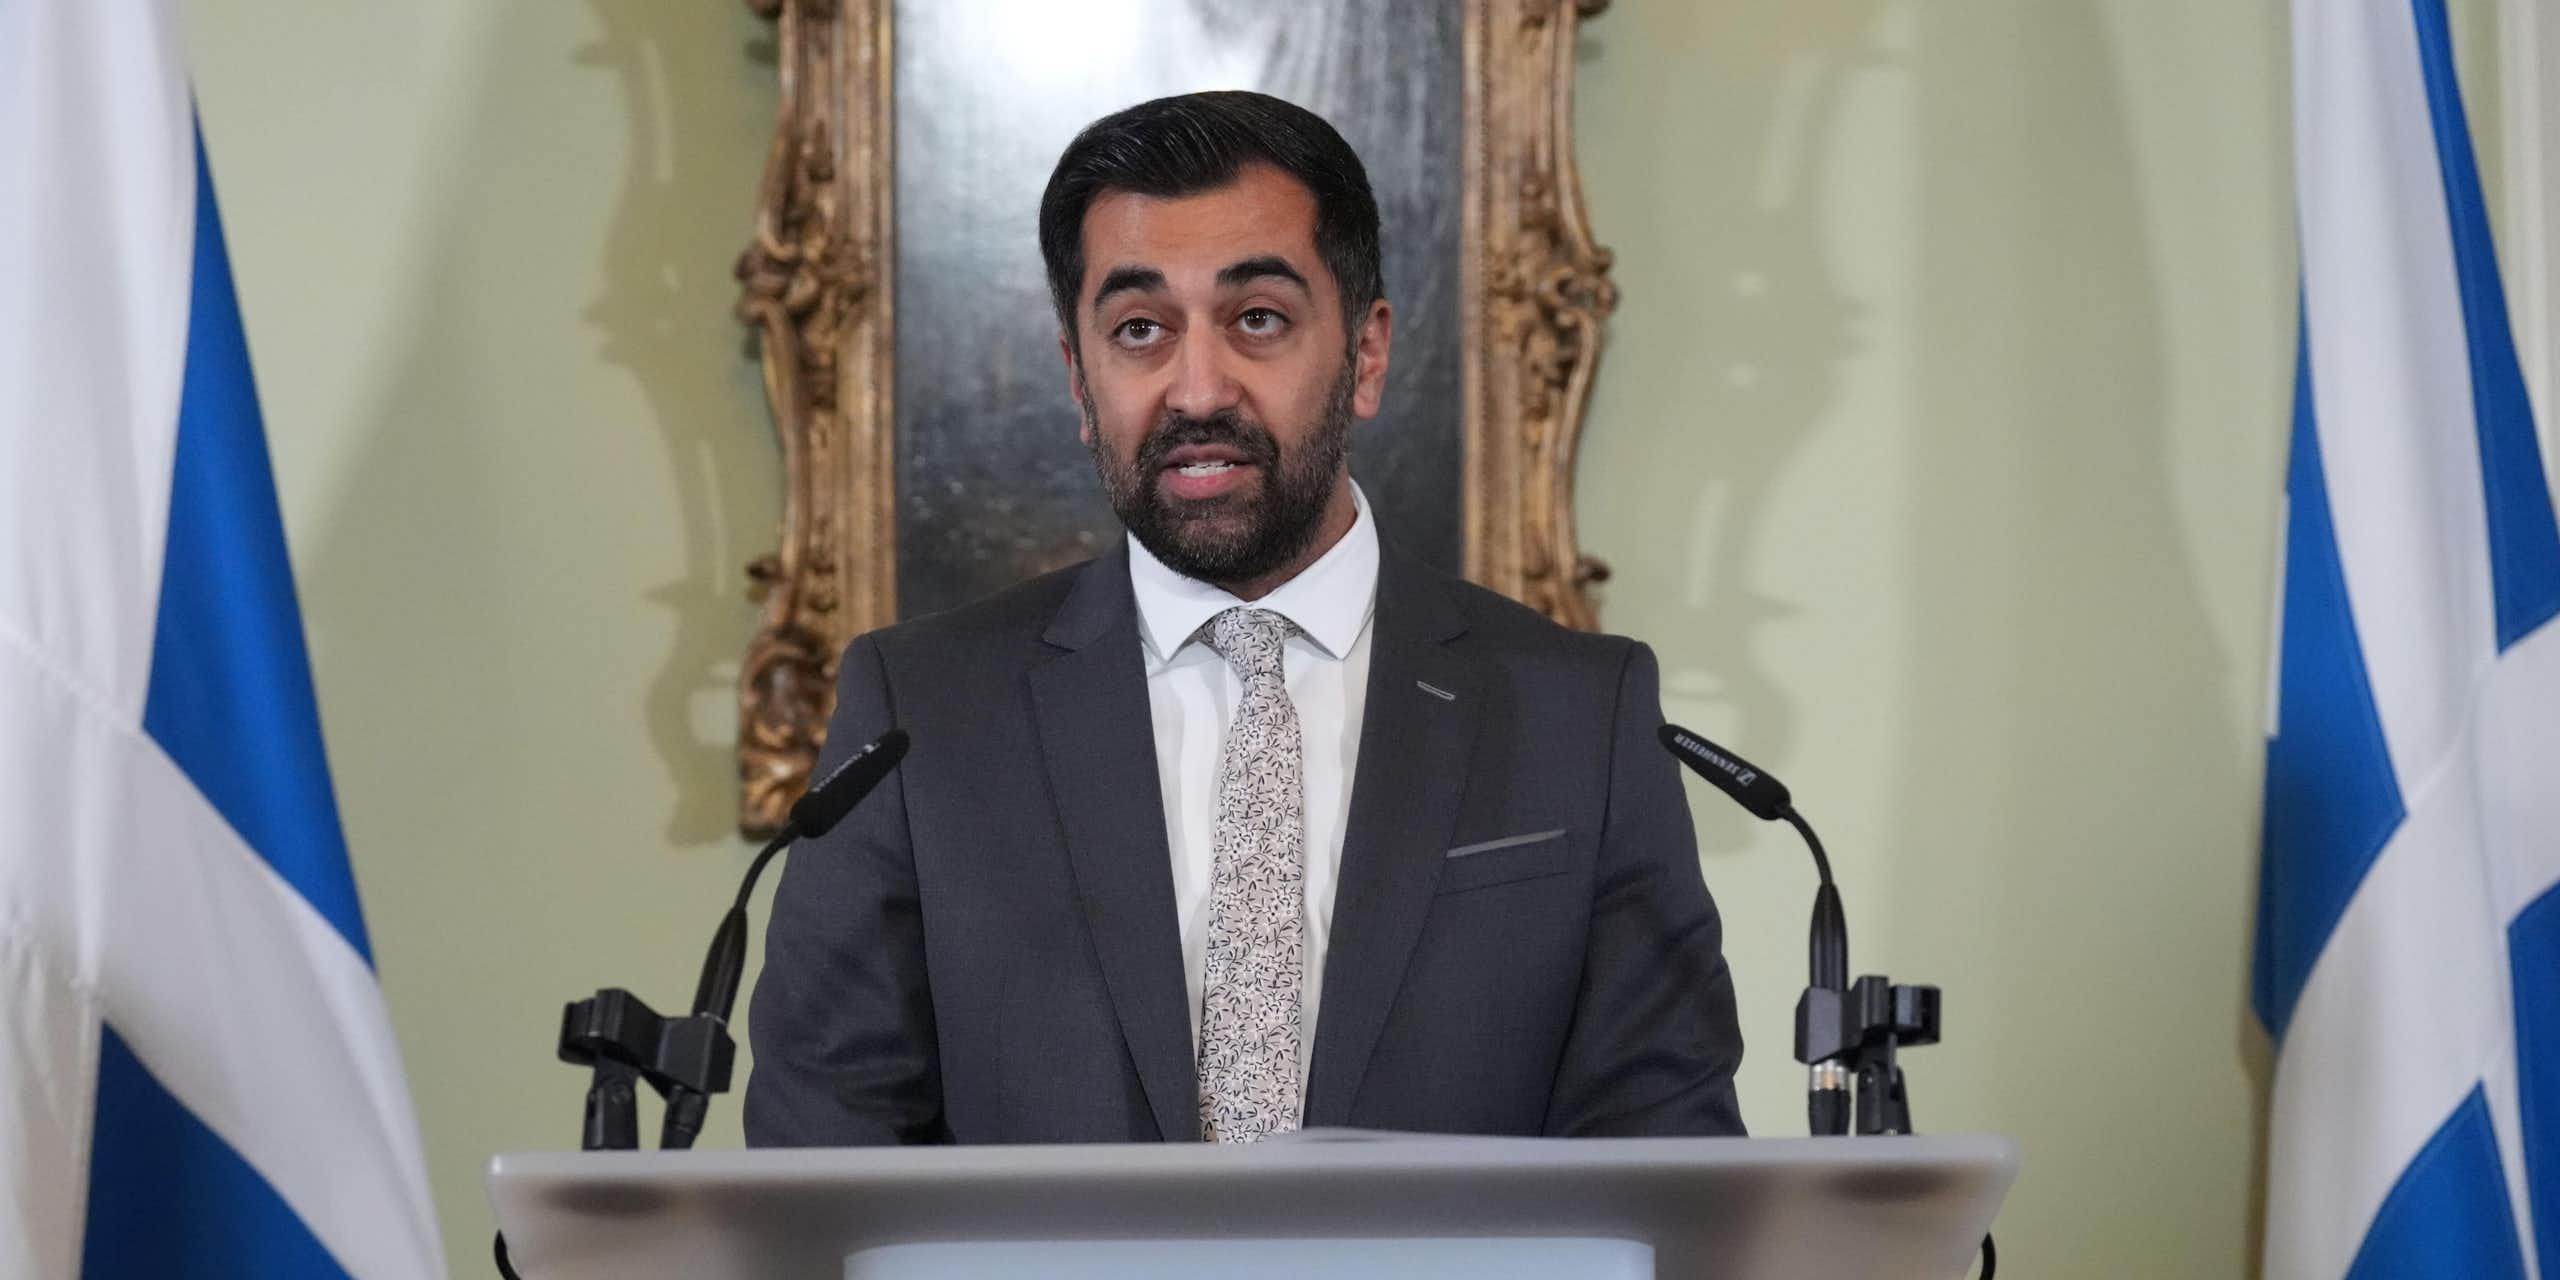 Humza Yousaf giving his resignation speech. 